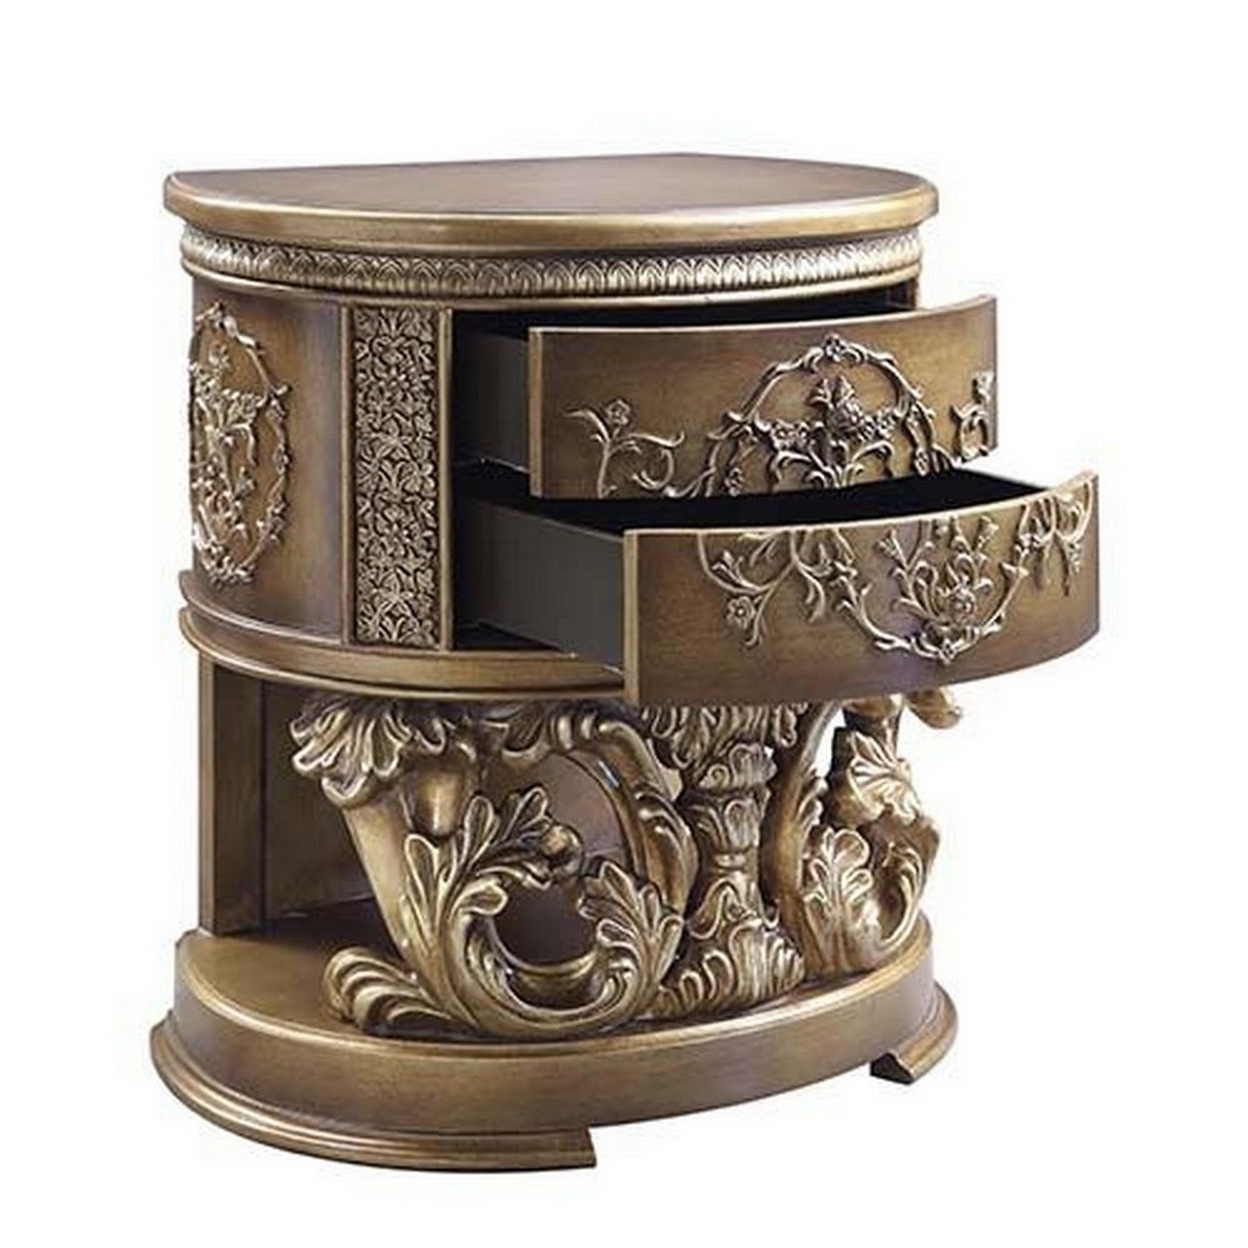 Nightstand With Scrolled Carvings And Half Moon Shape, Antique Gold- Saltoro Sherpi